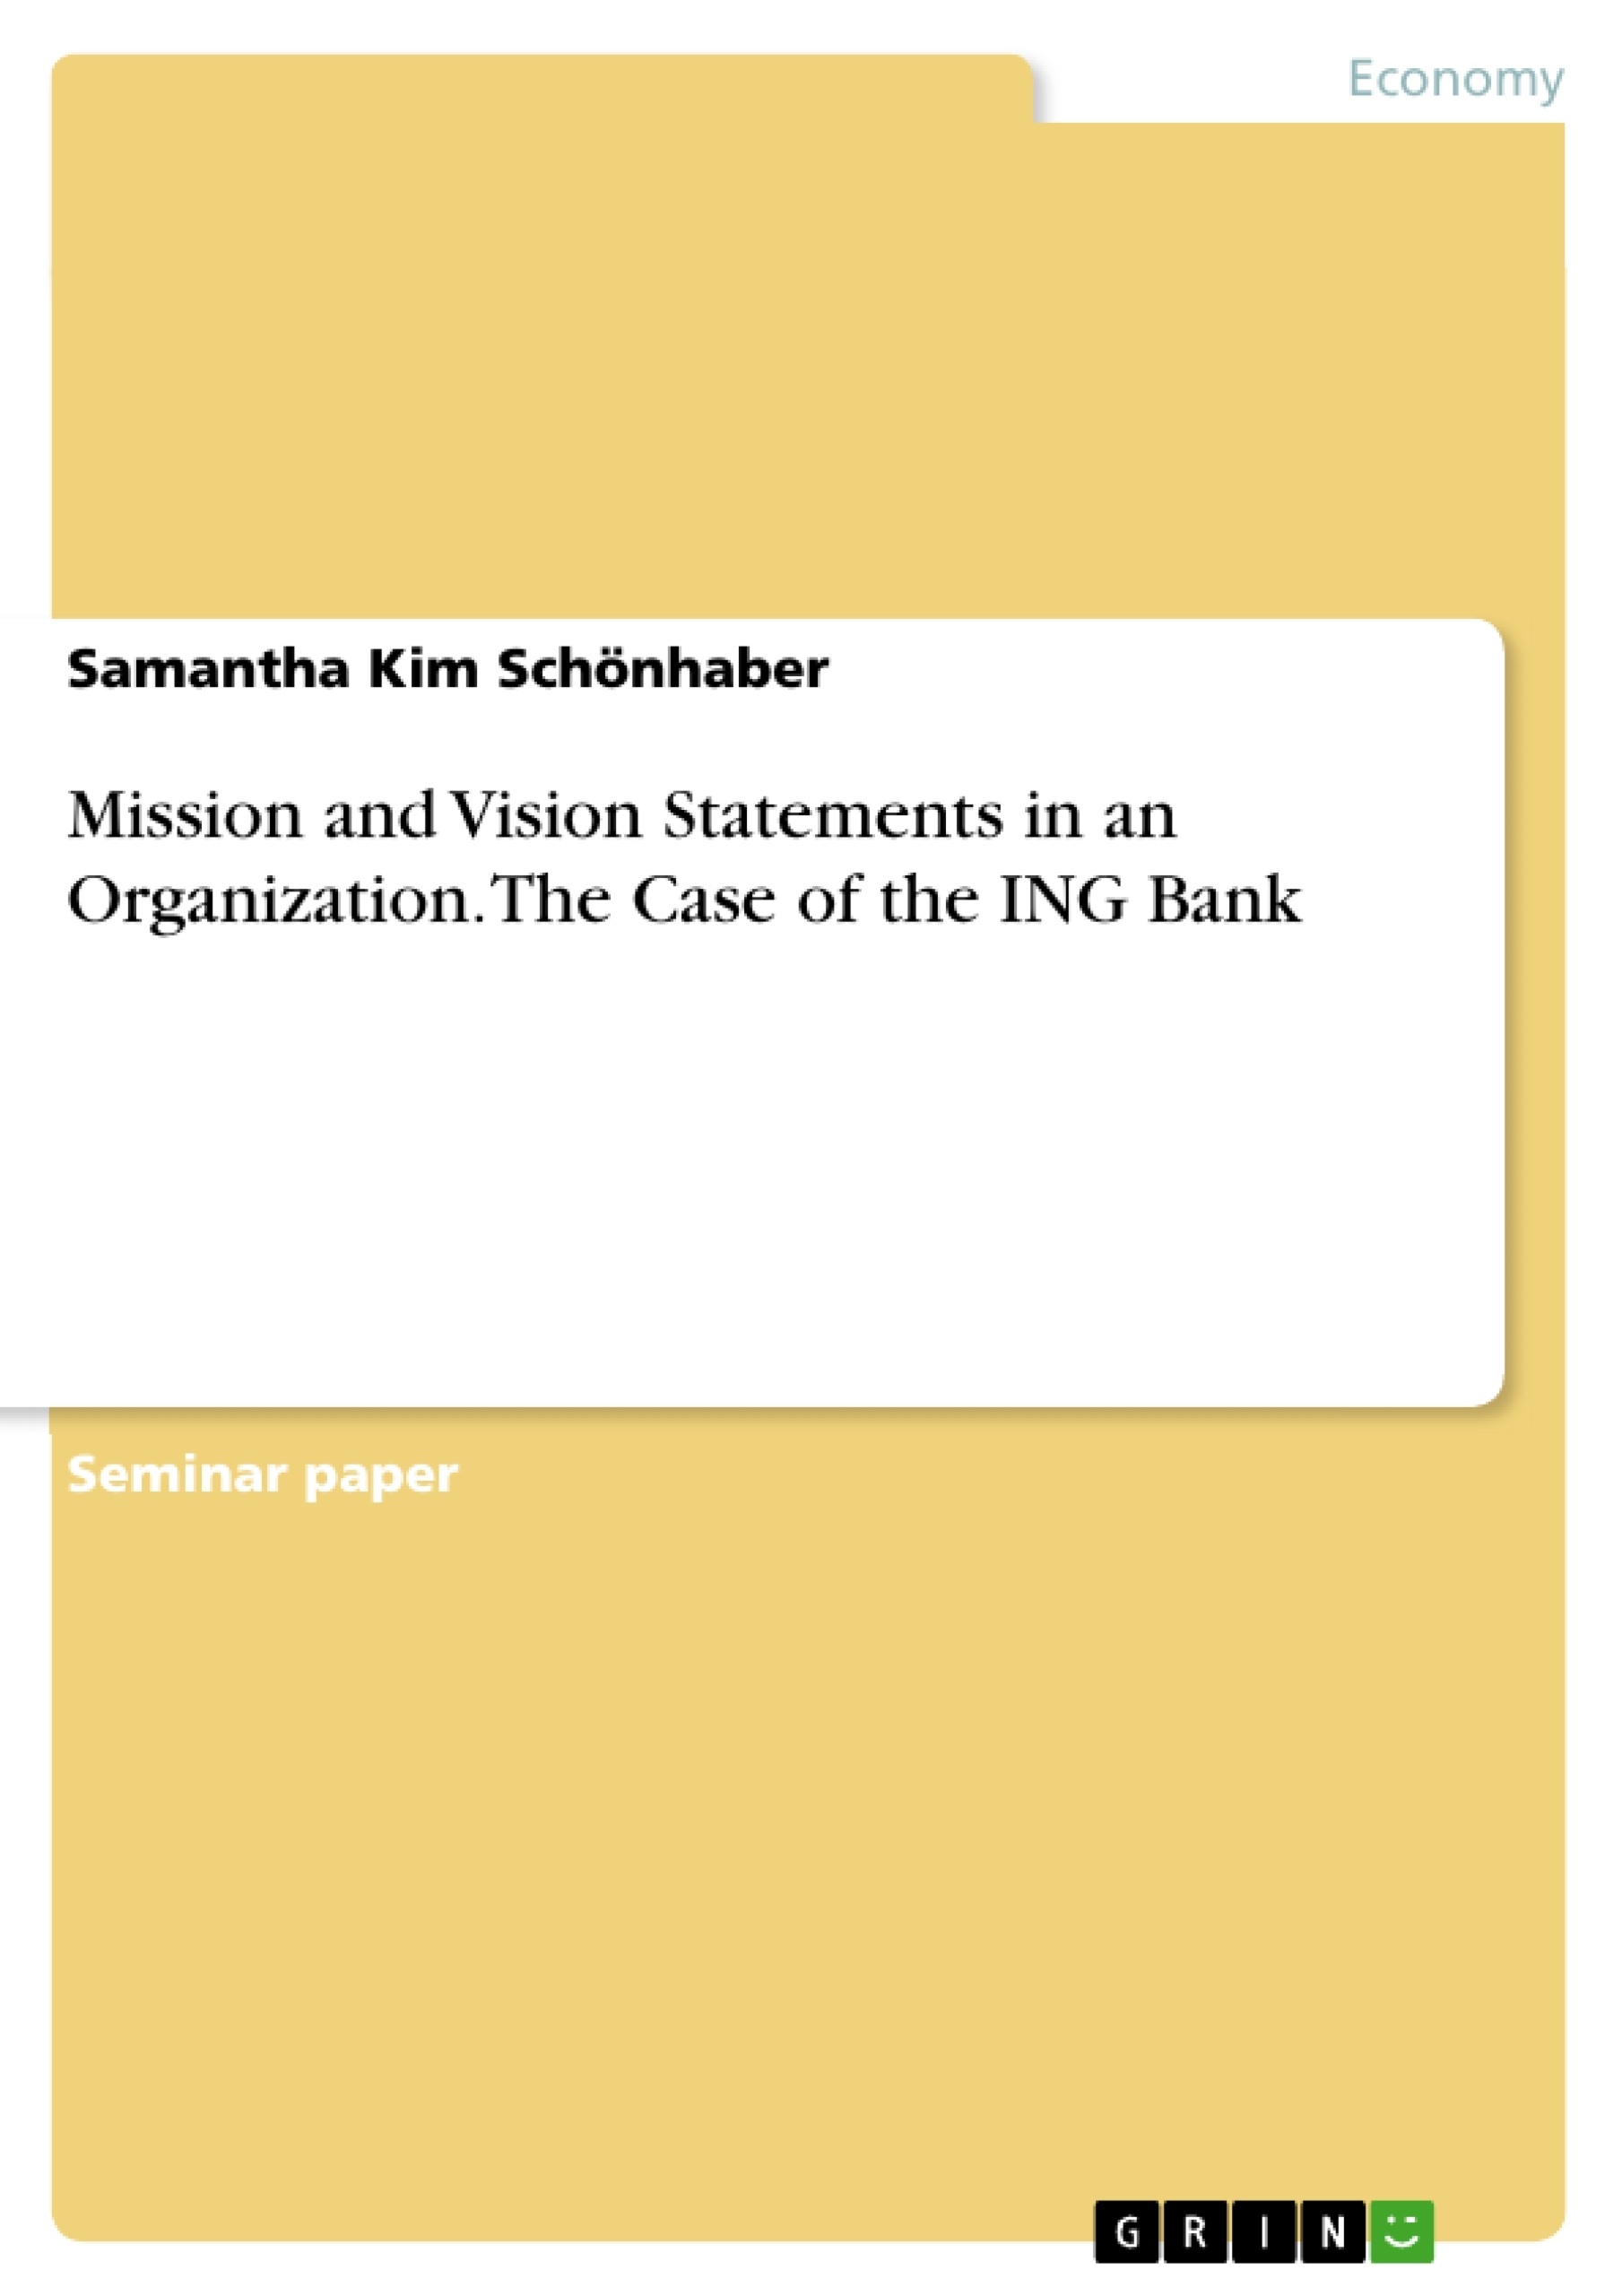 Titel: Mission and Vision Statements in an Organization. The Case of the ING Bank